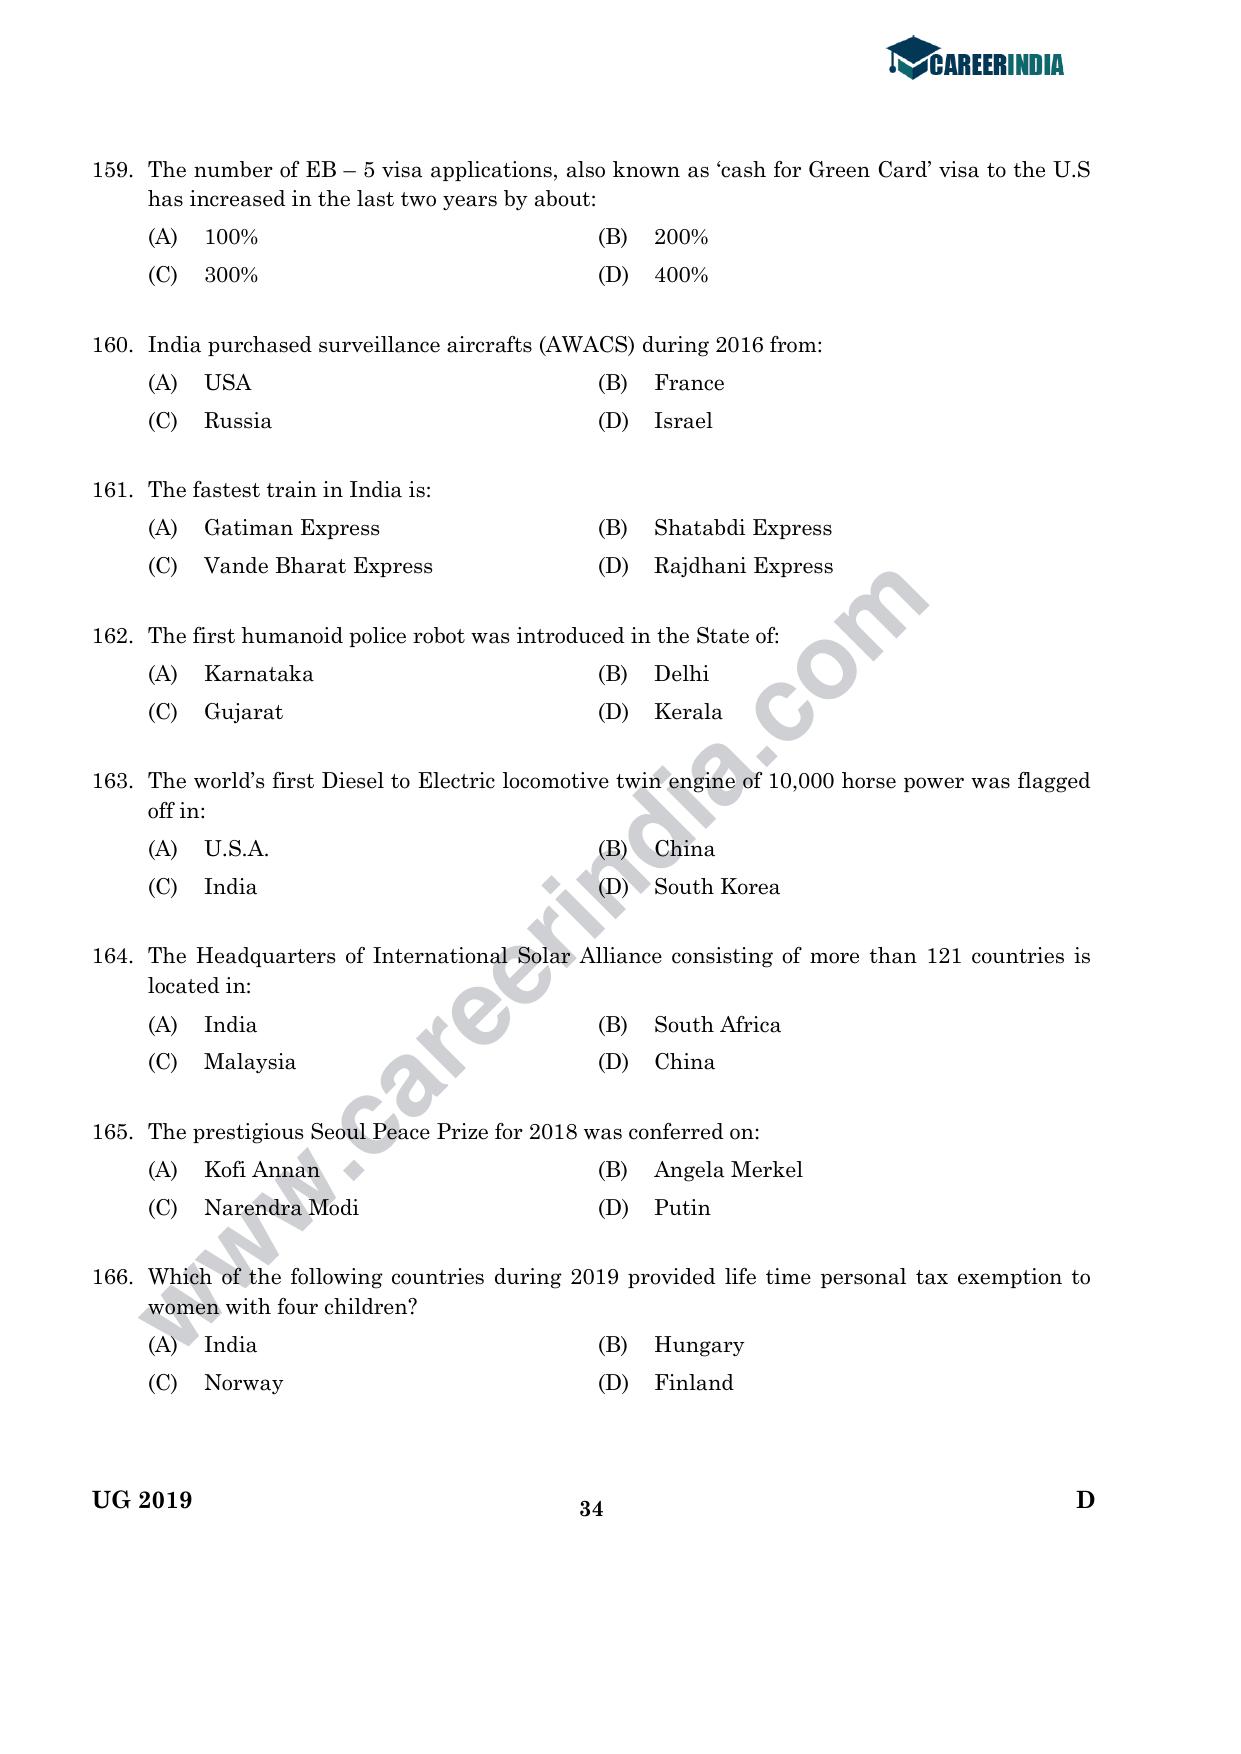 CLAT 2019 UG Logical-Reasoning Question Paper - Page 33